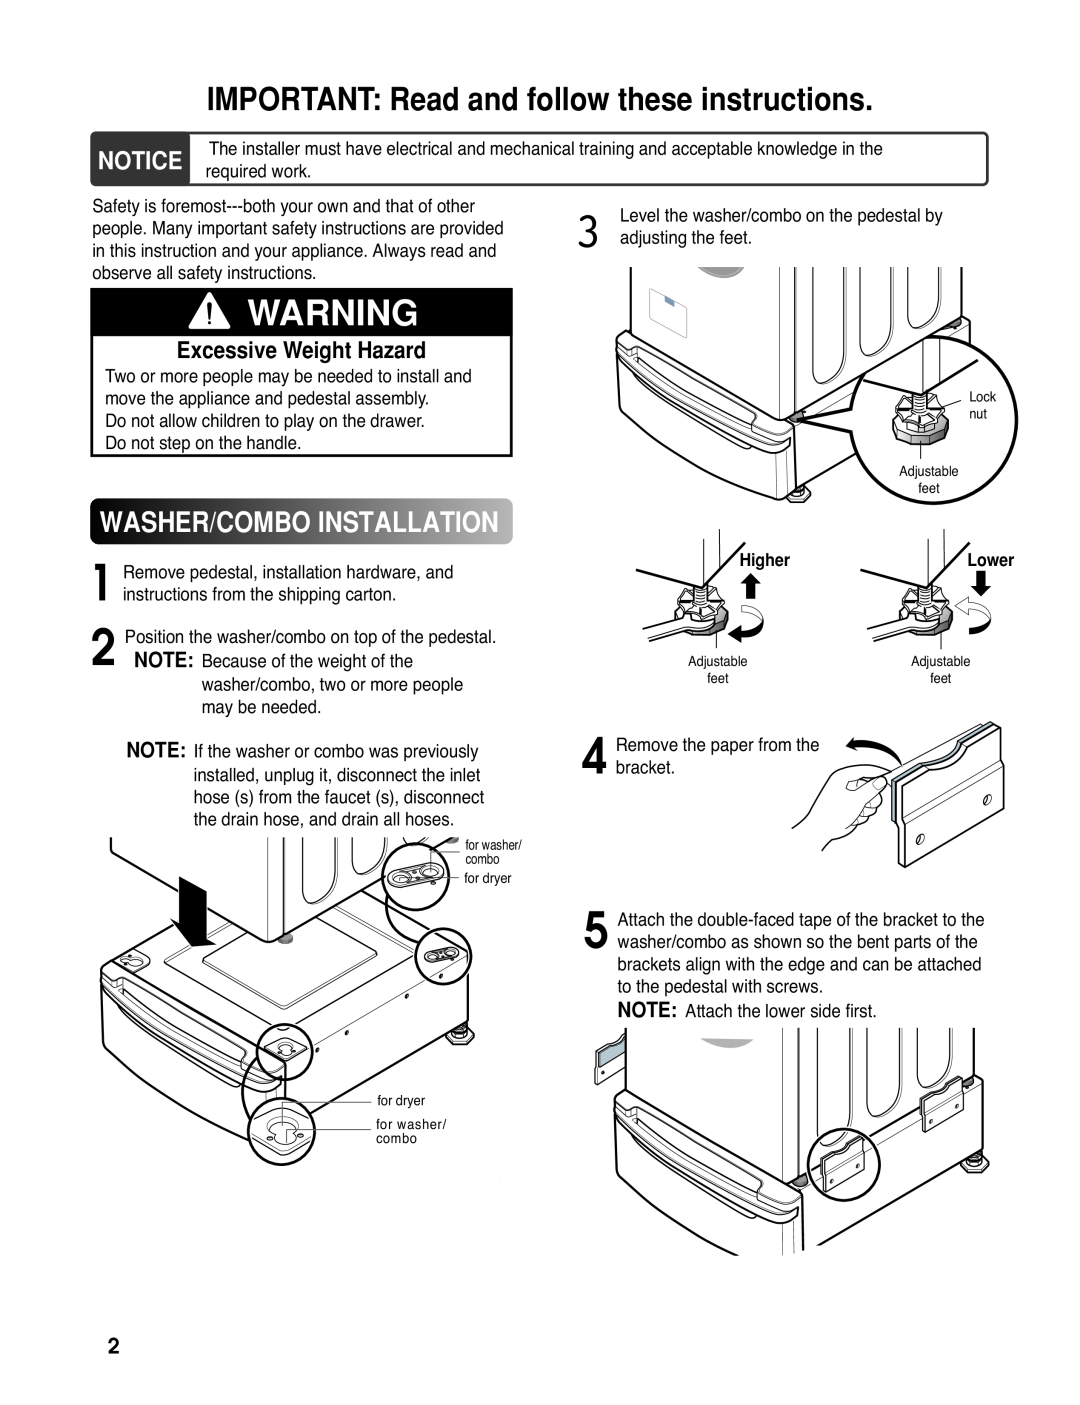 LG Electronics 3828ER3020V Washer/Combo Installation, IMPORTANT Read and follow these instructions 